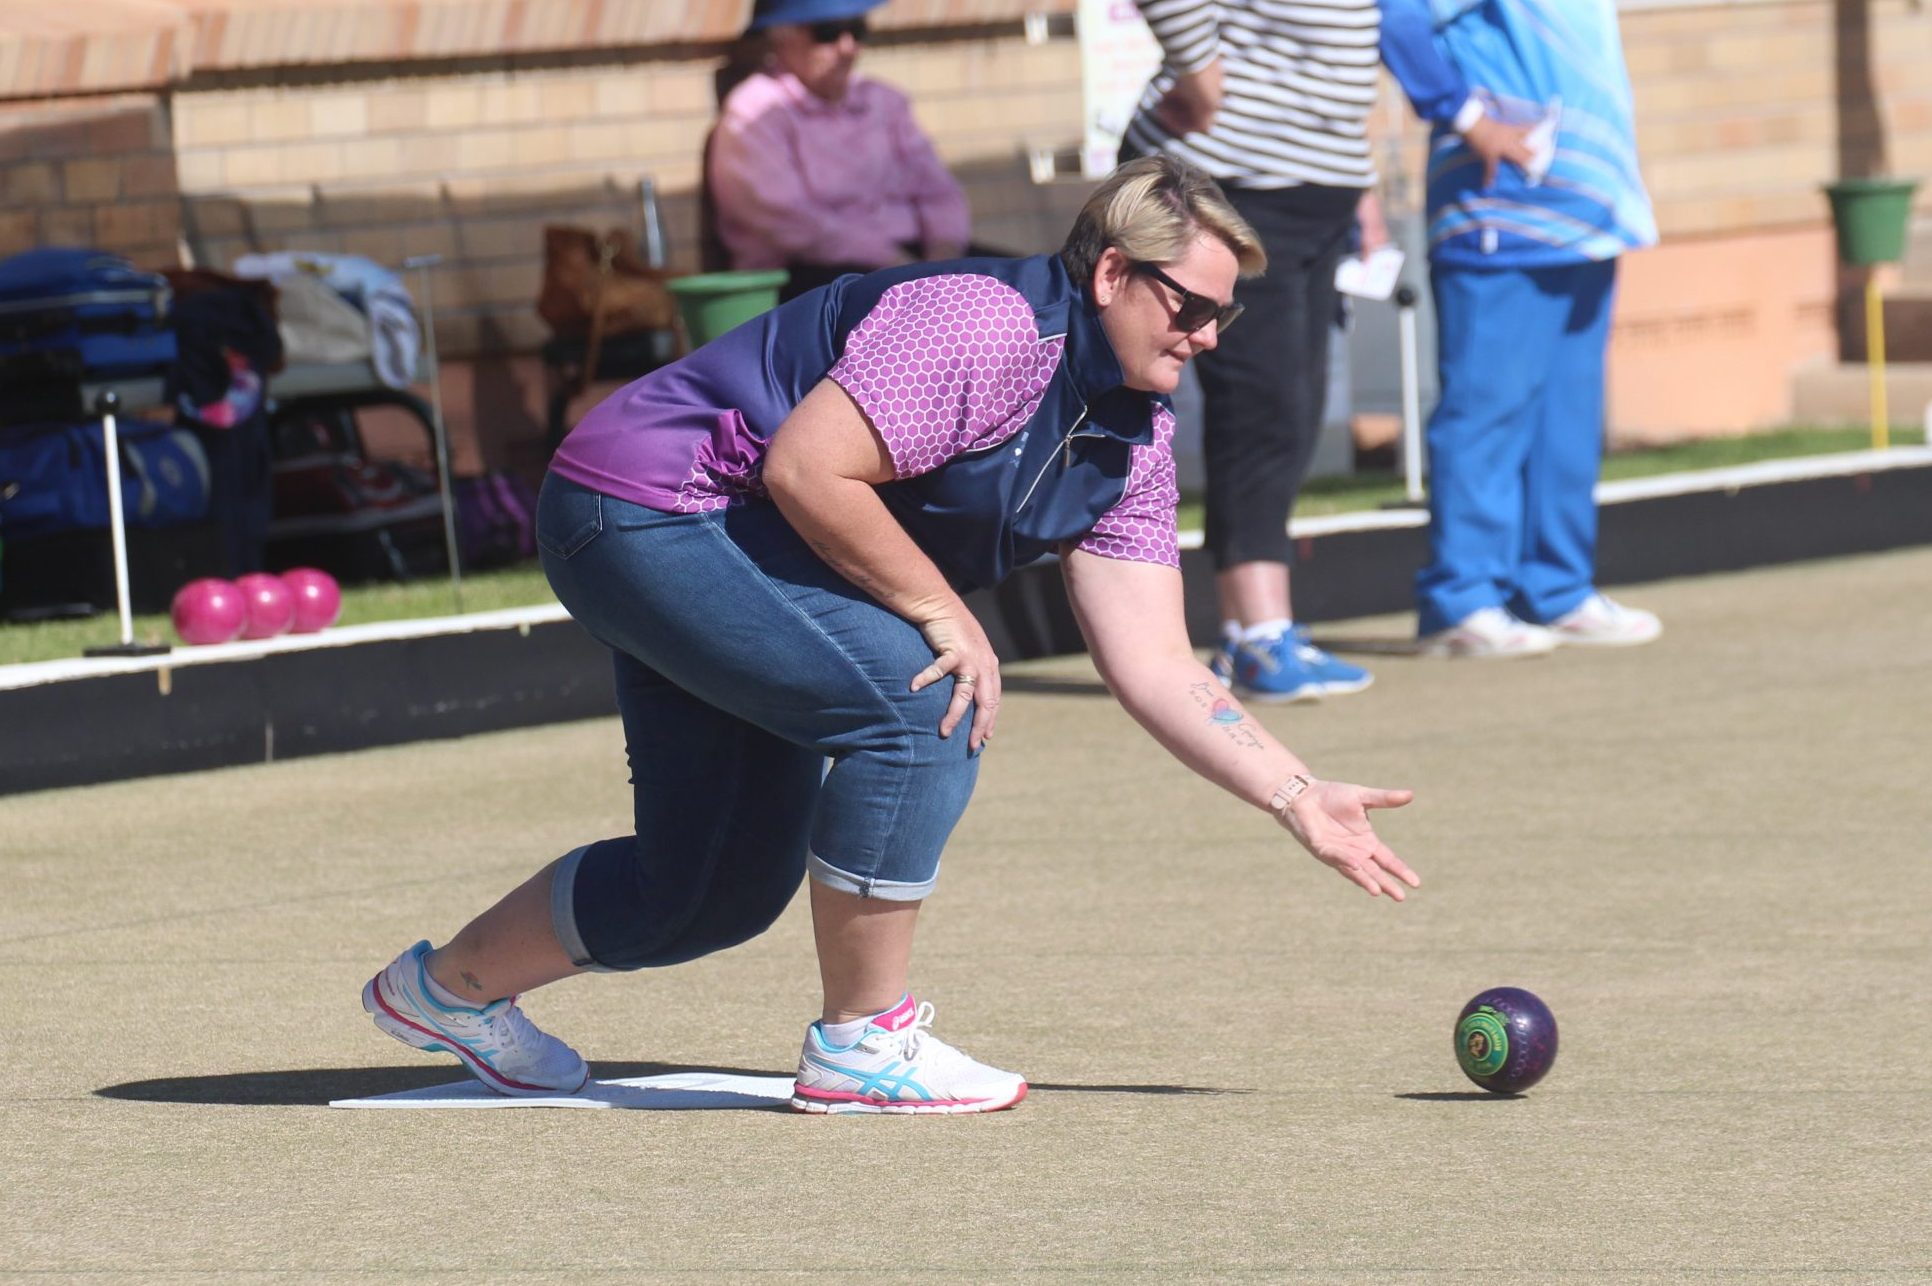 Lady bowlers enjoy a day on the green in Wee Waa